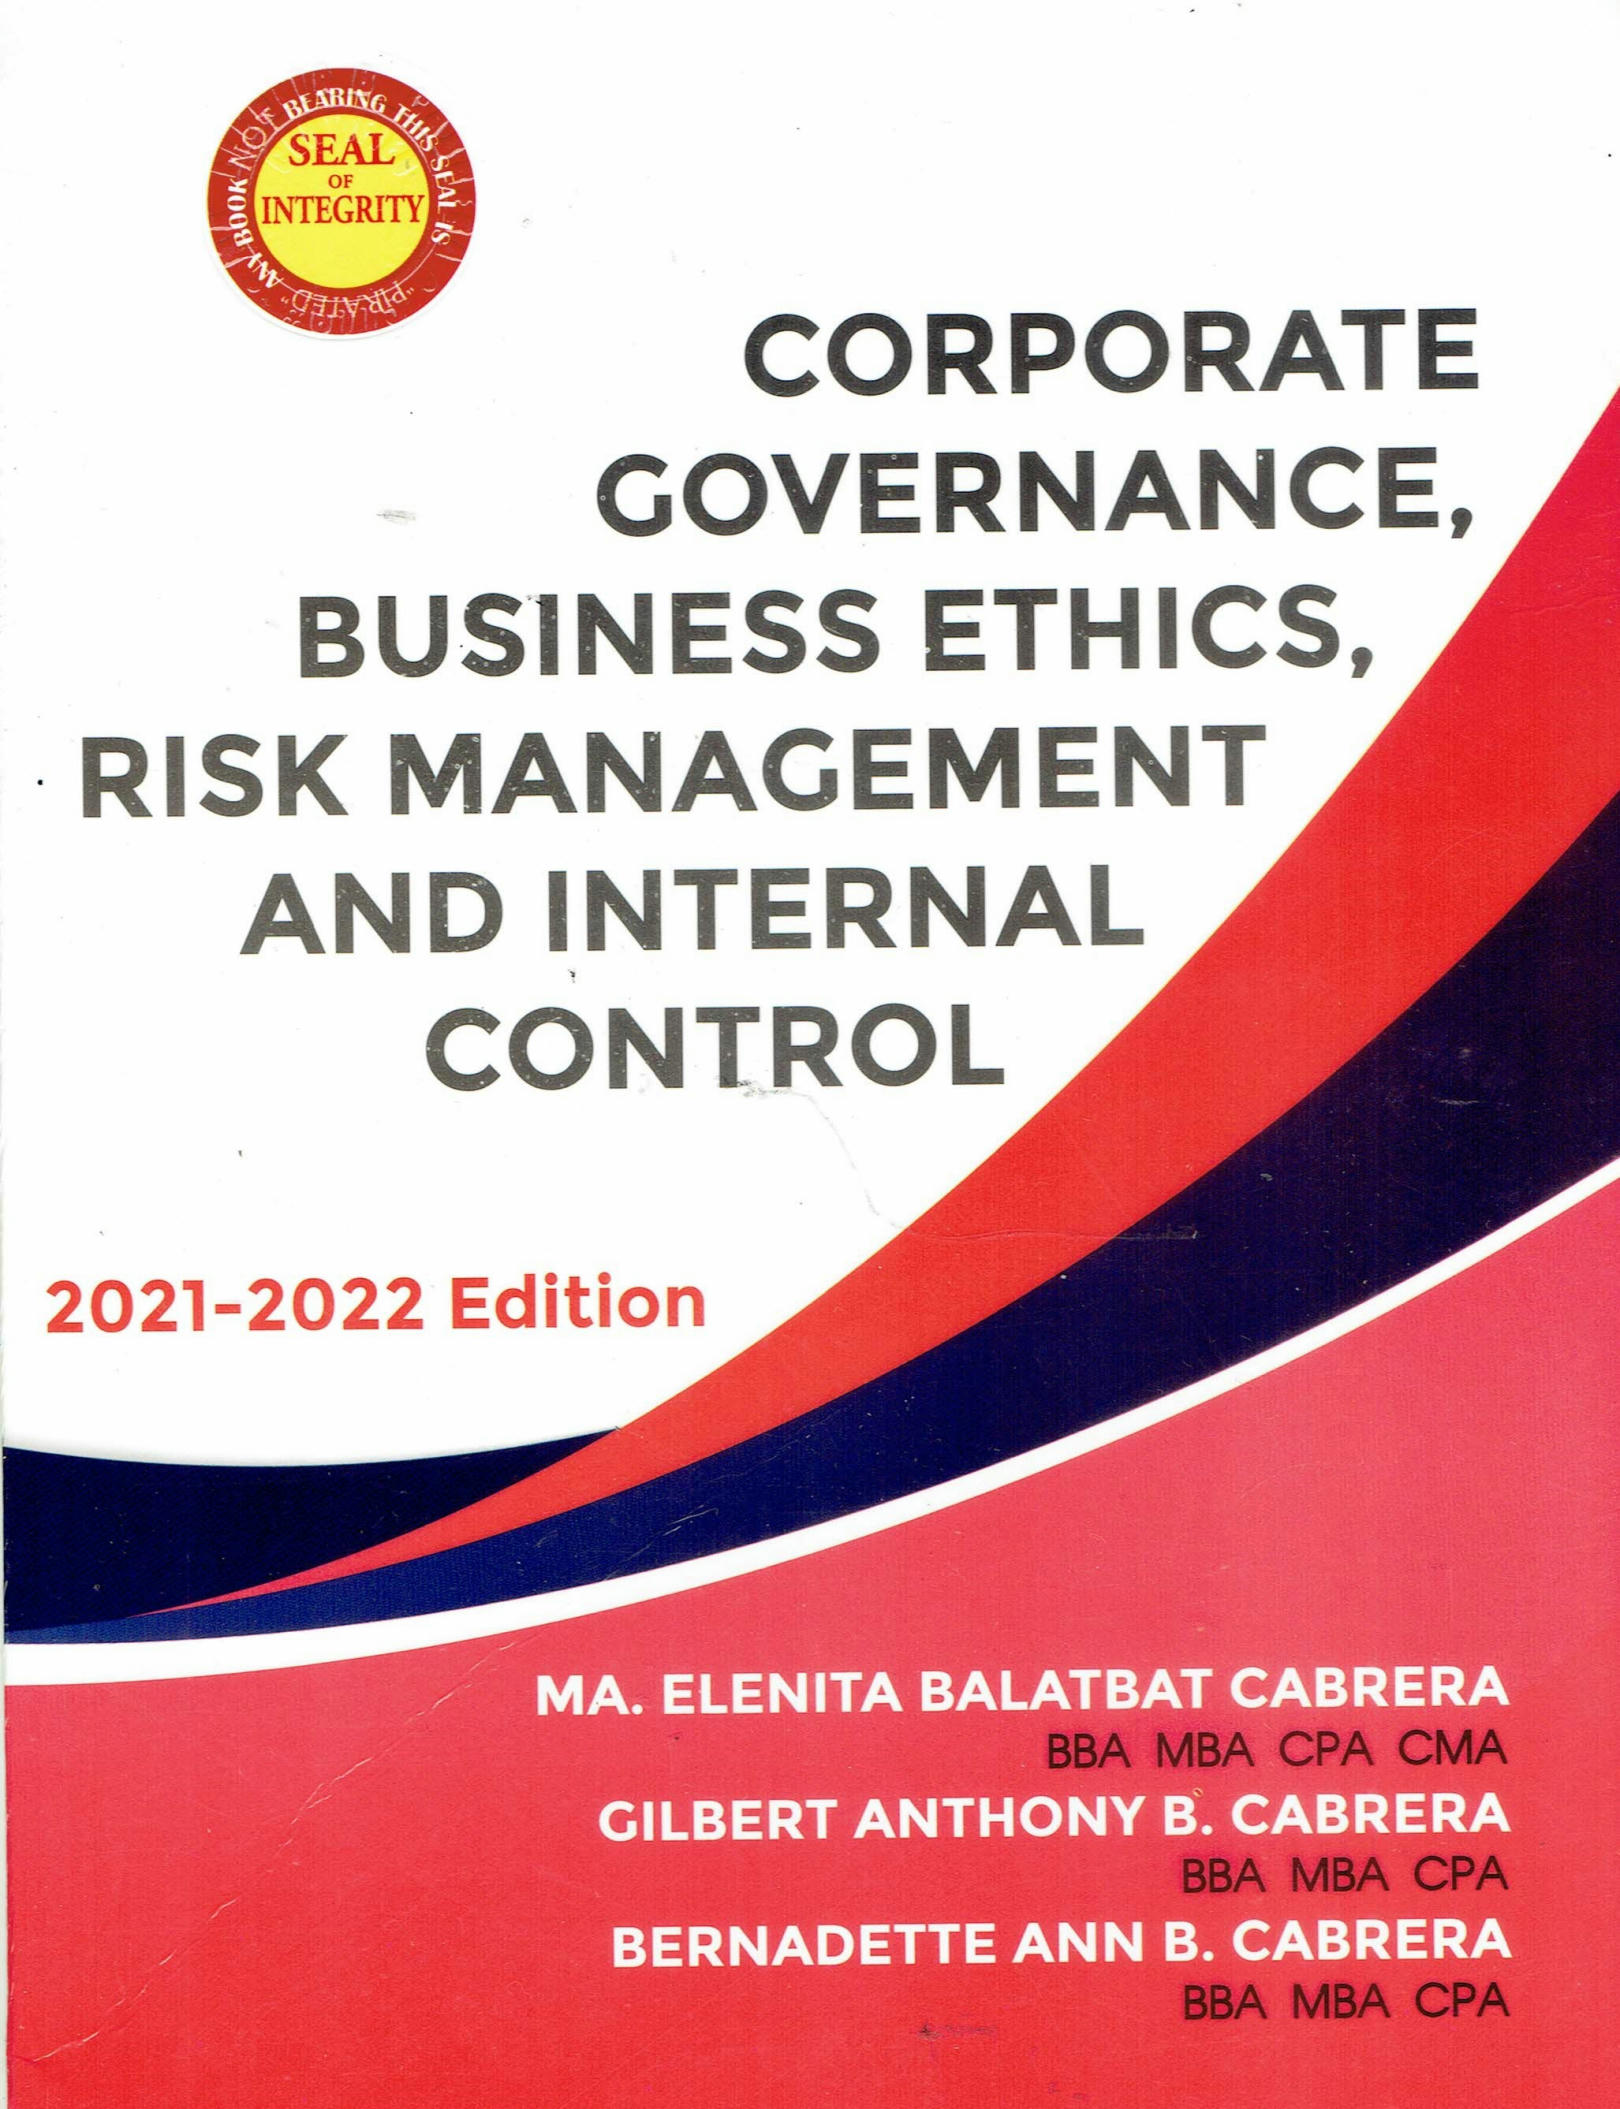 Corporate governance, business ethics, risk management and internal control